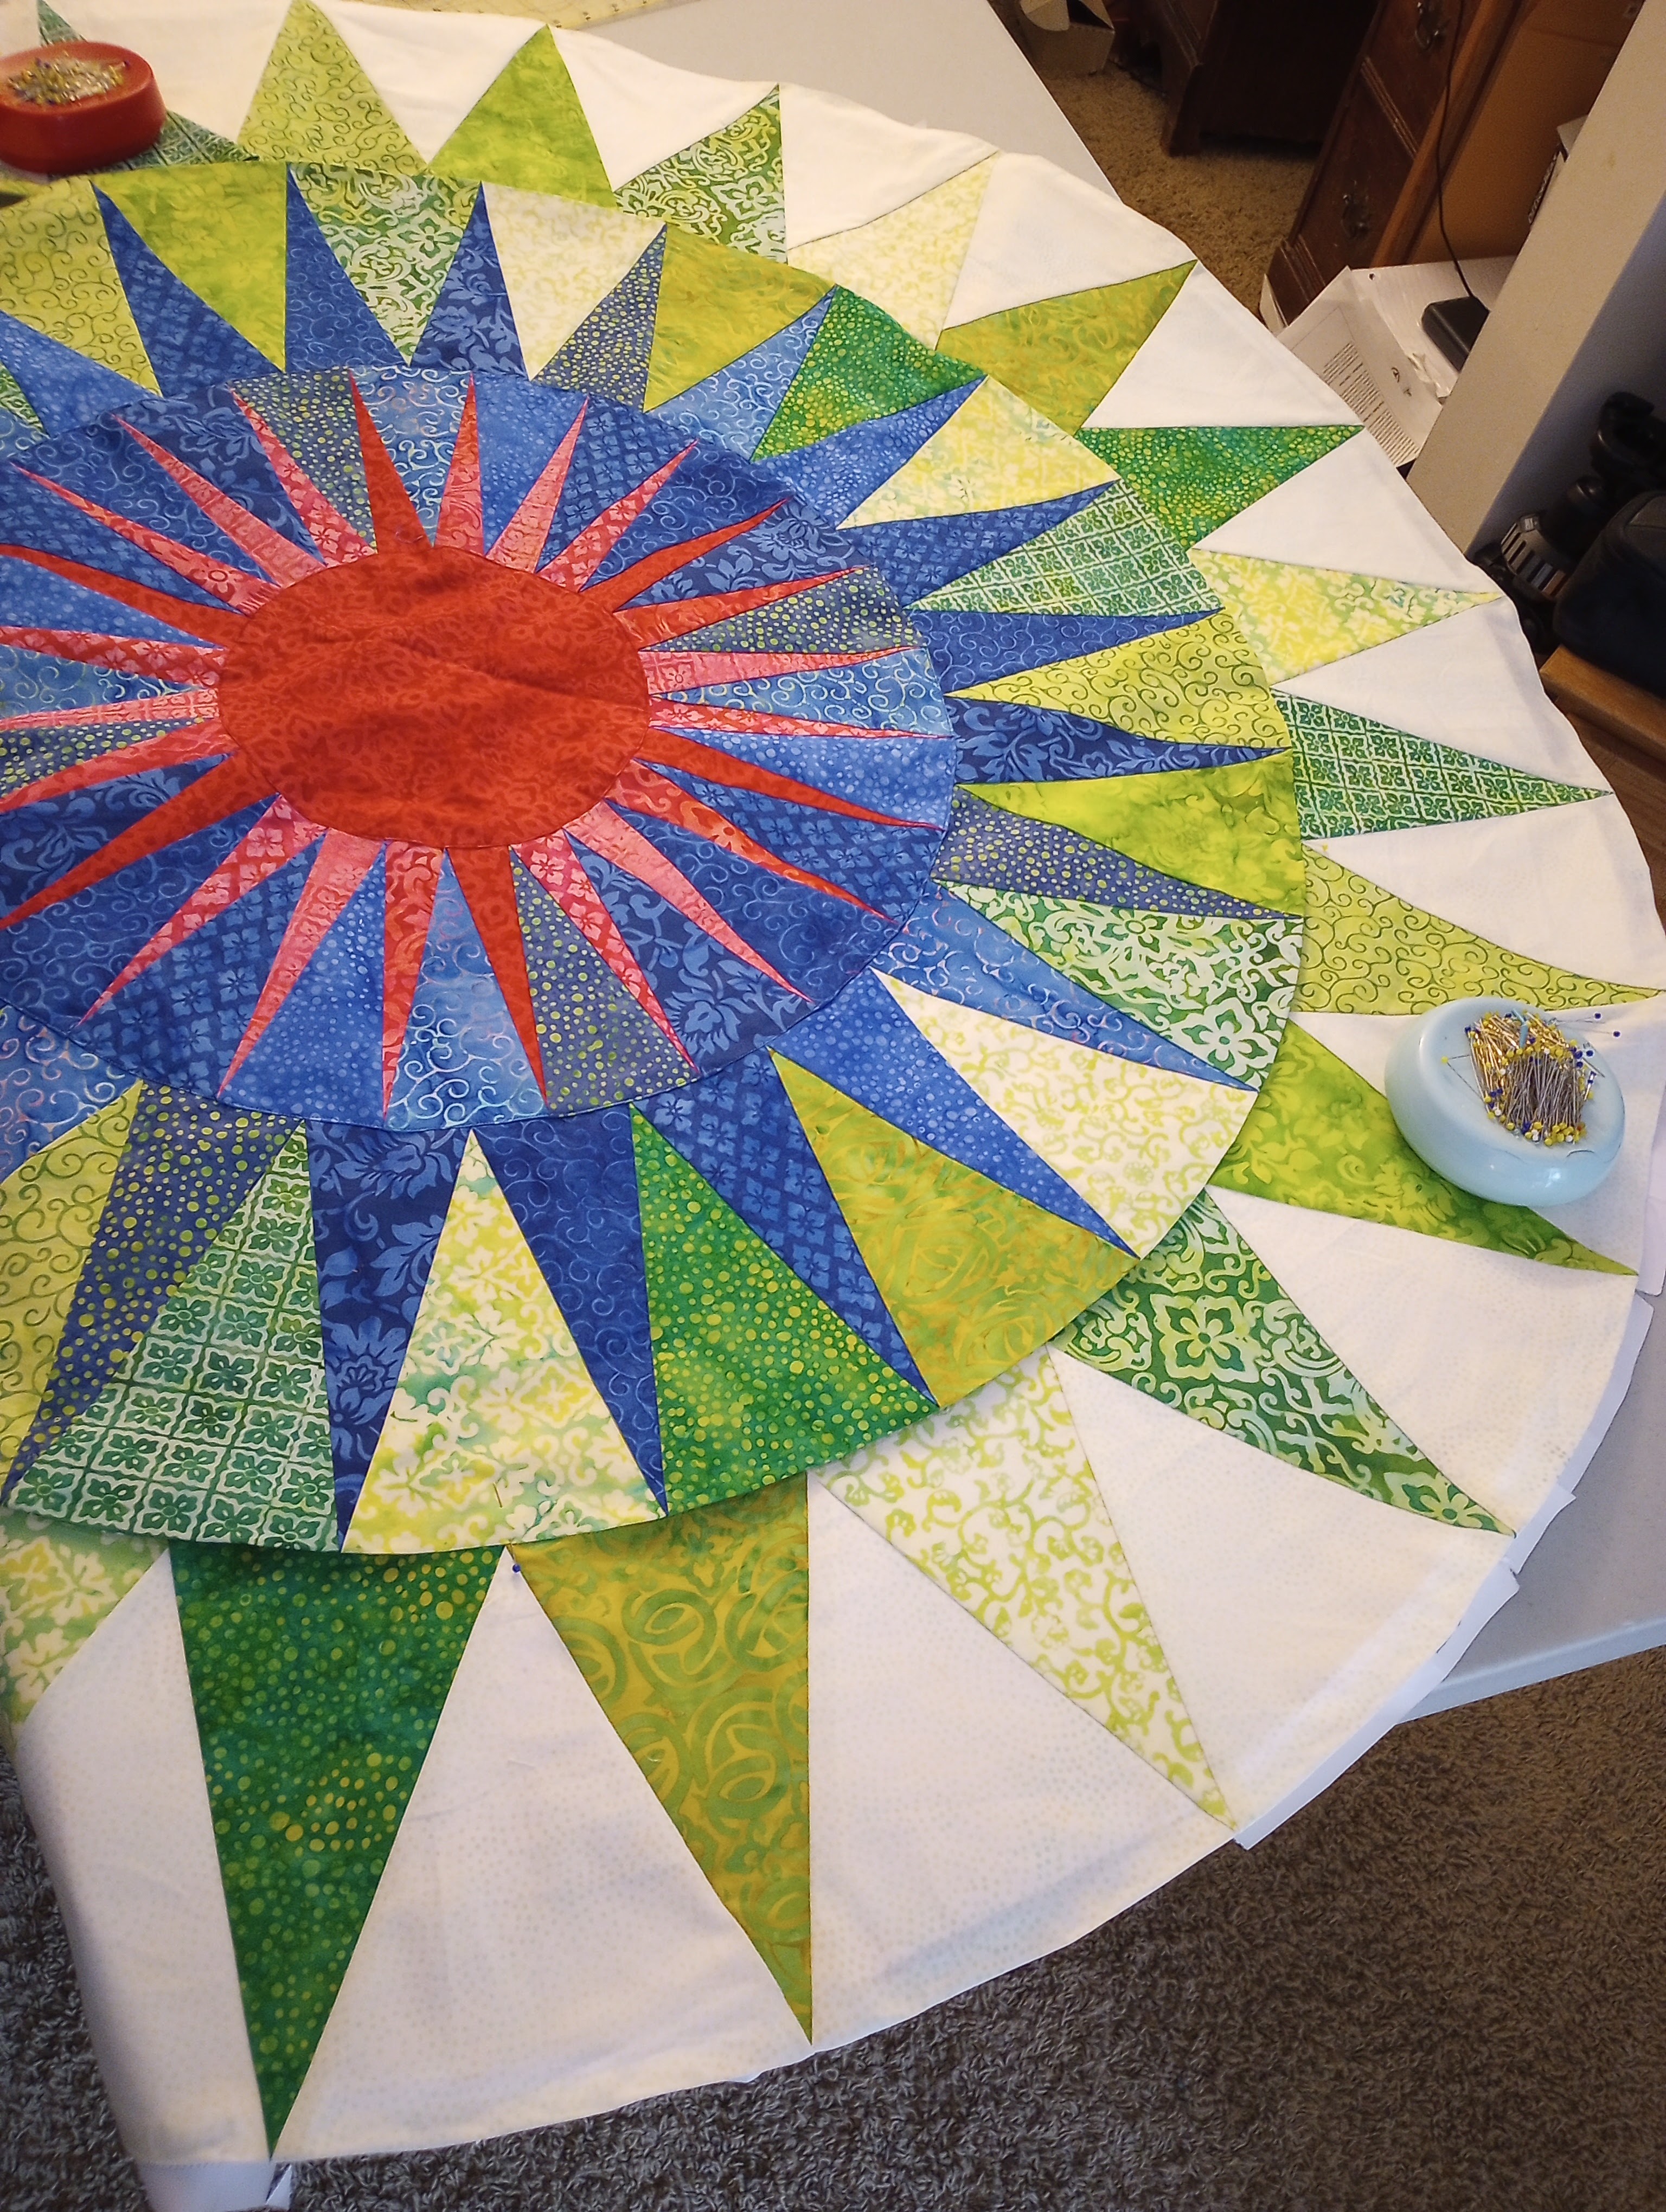 Websterquilt: Quilting my English Paper Piecing by Machine